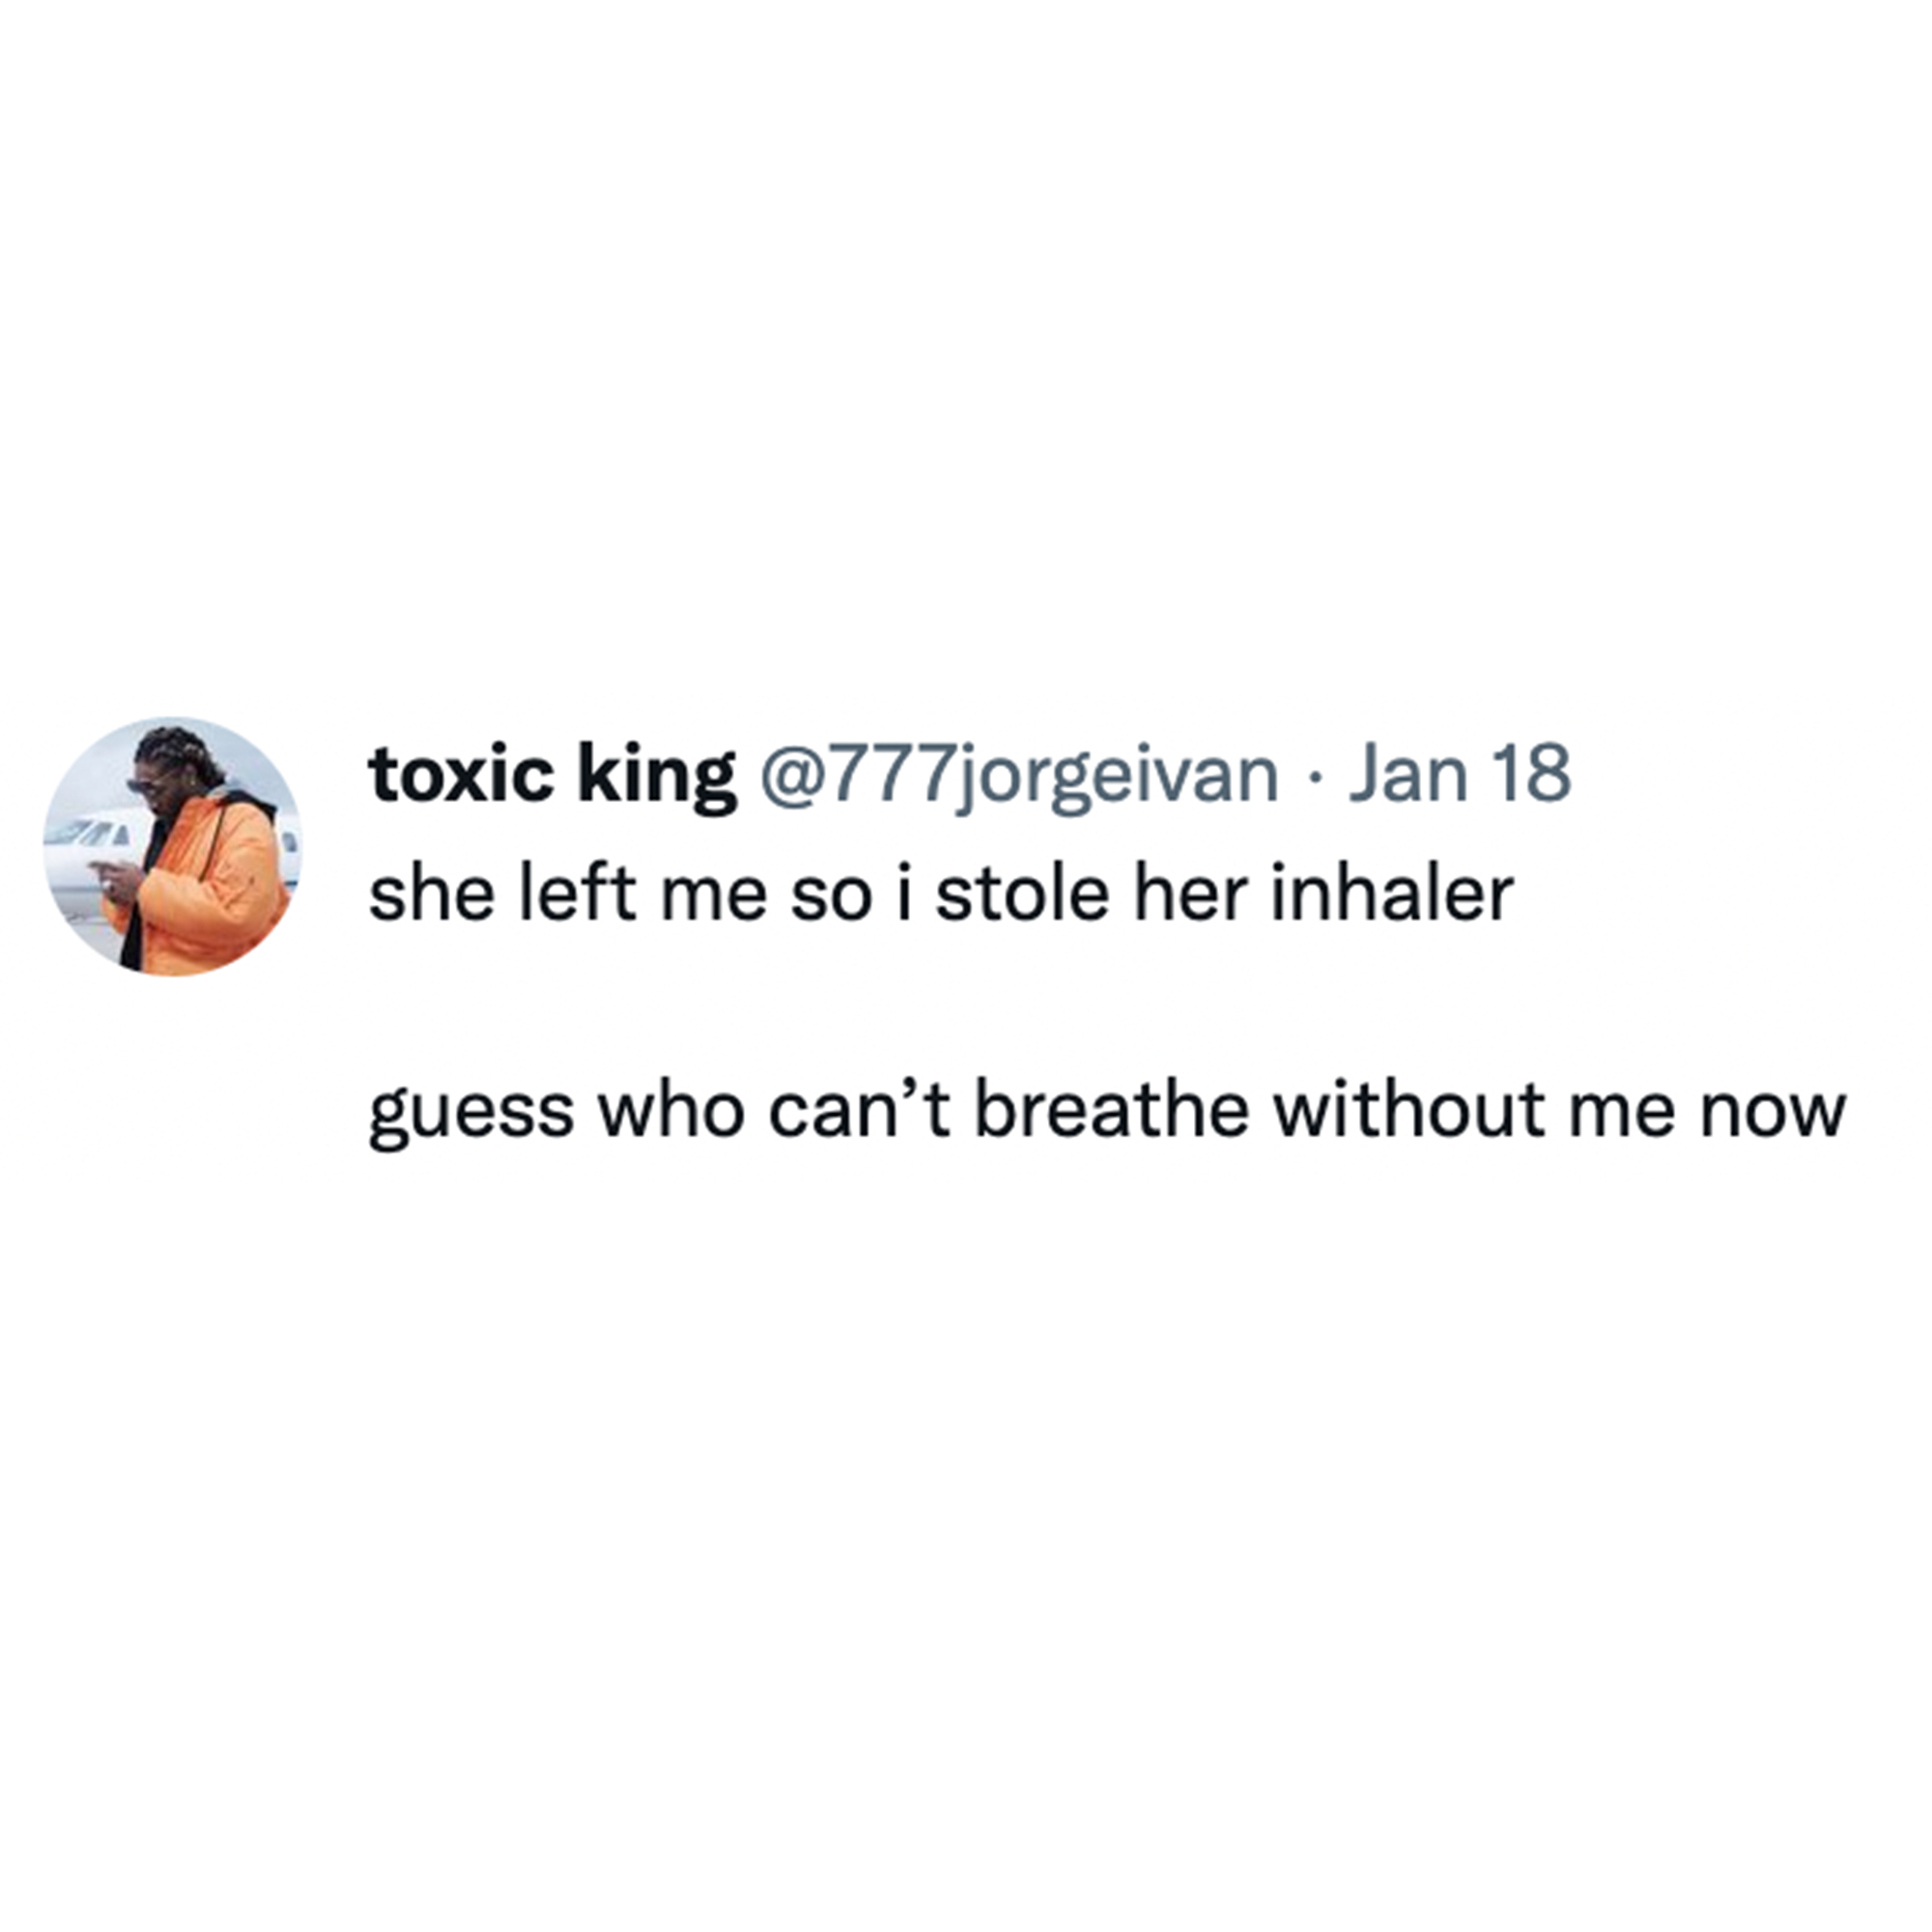 Toxic Memes and Tweets - toxic king . Jan 18 she left me so i stole her inhaler guess who can't breathe without me now